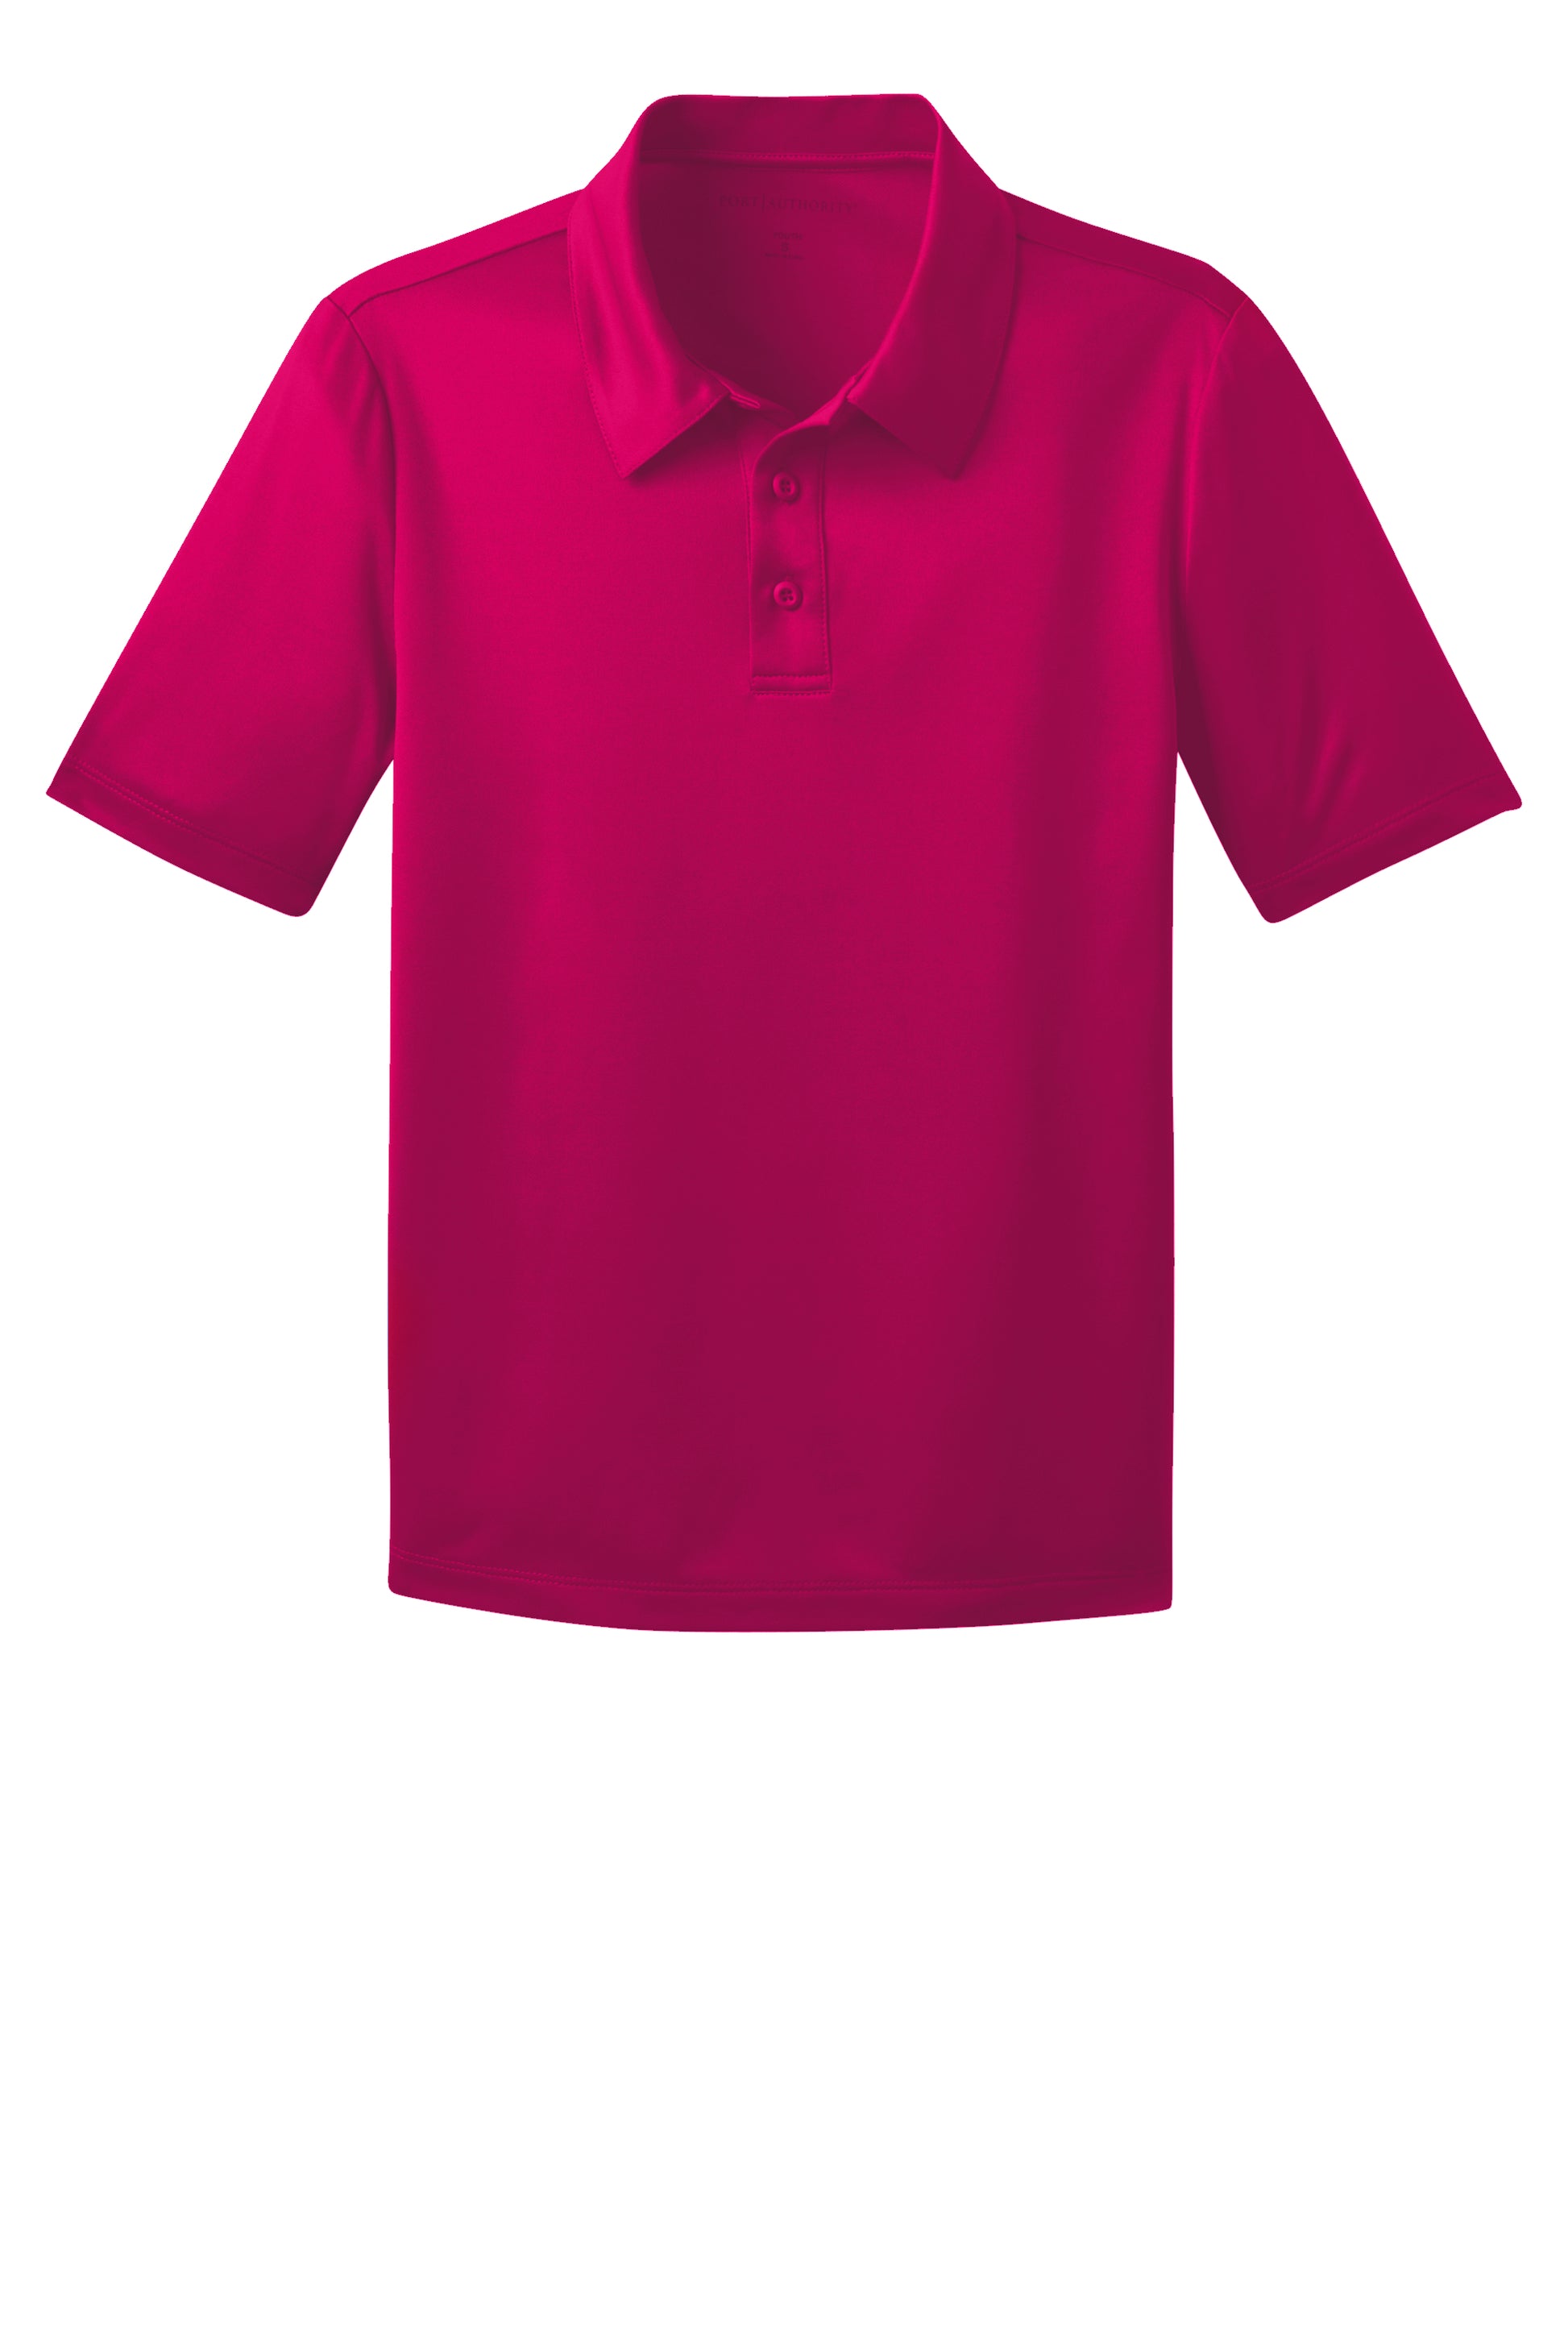 port authority youth silk touch performance polo pink raspberry